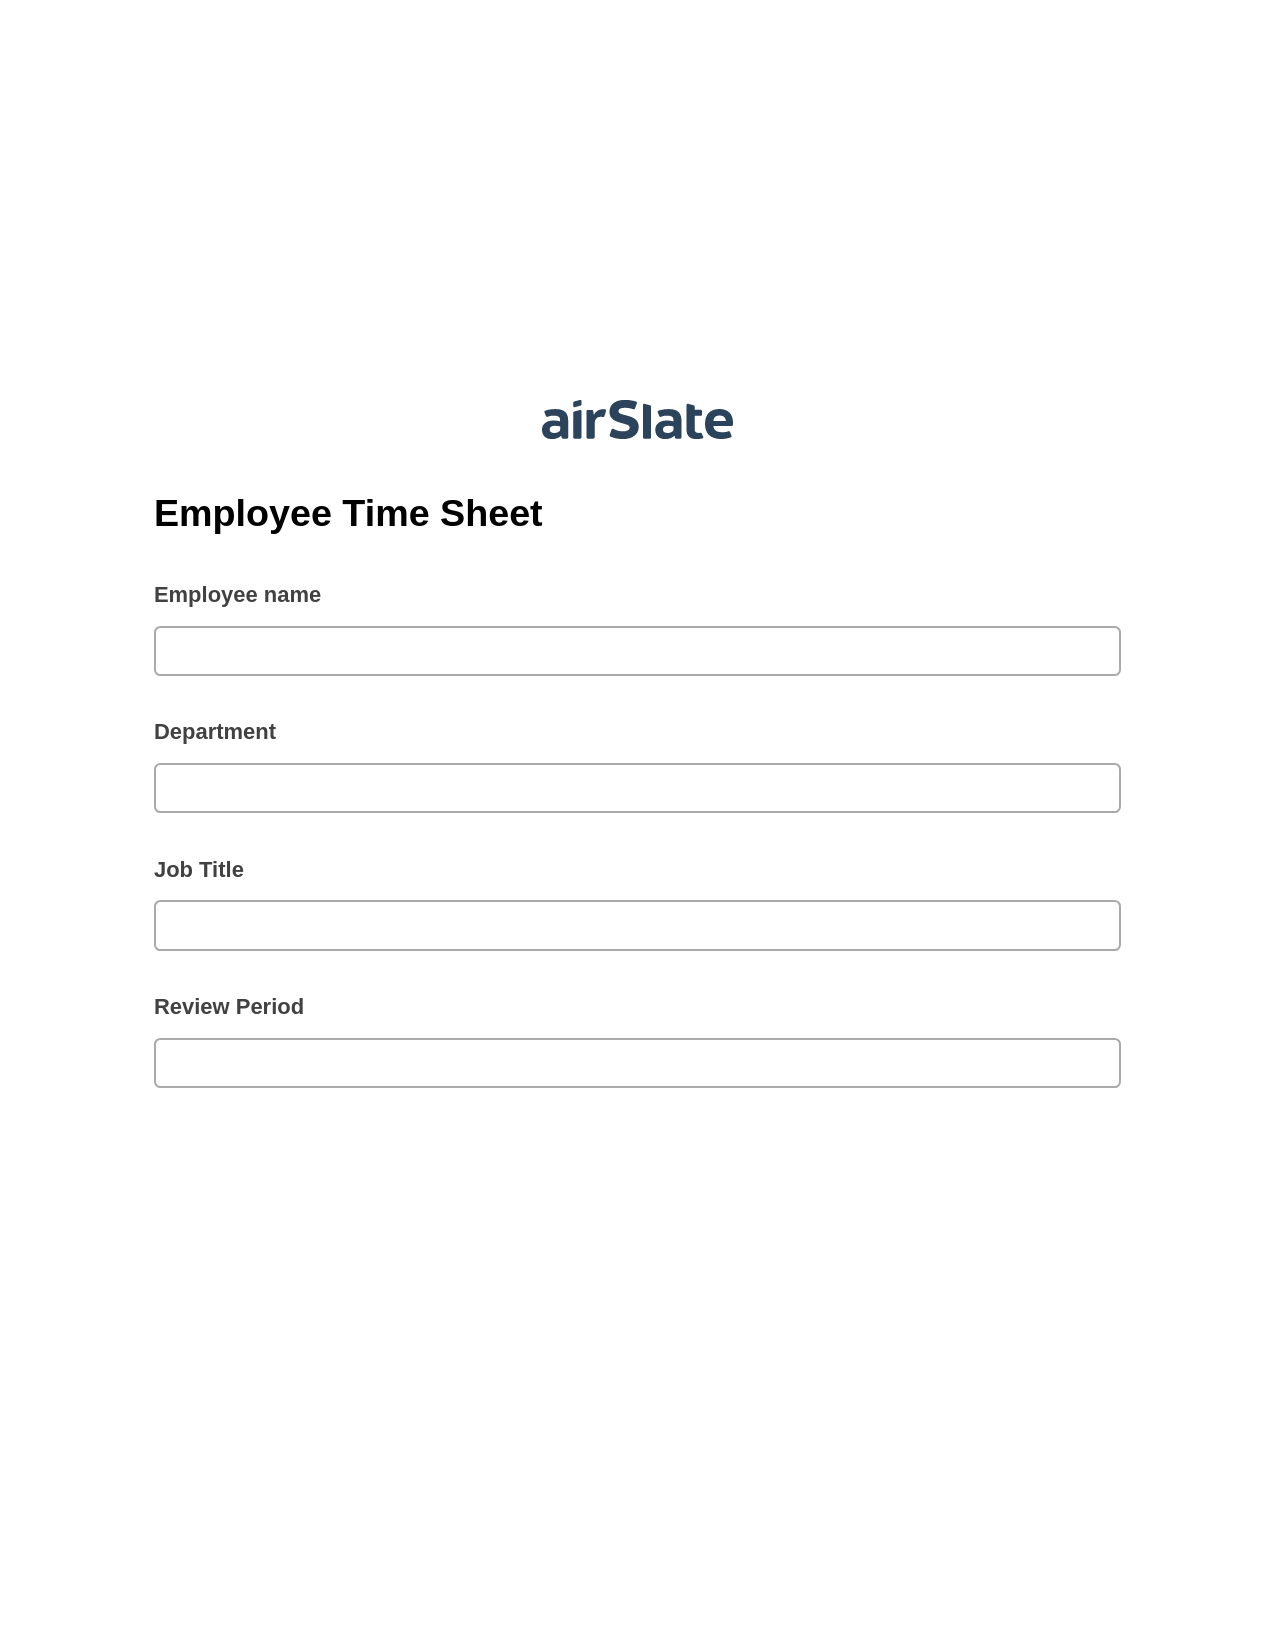 Multirole Employee Time Sheet Pre-fill from another Slate Bot, Create Salesforce Records Bot, Export to Google Sheet Bot